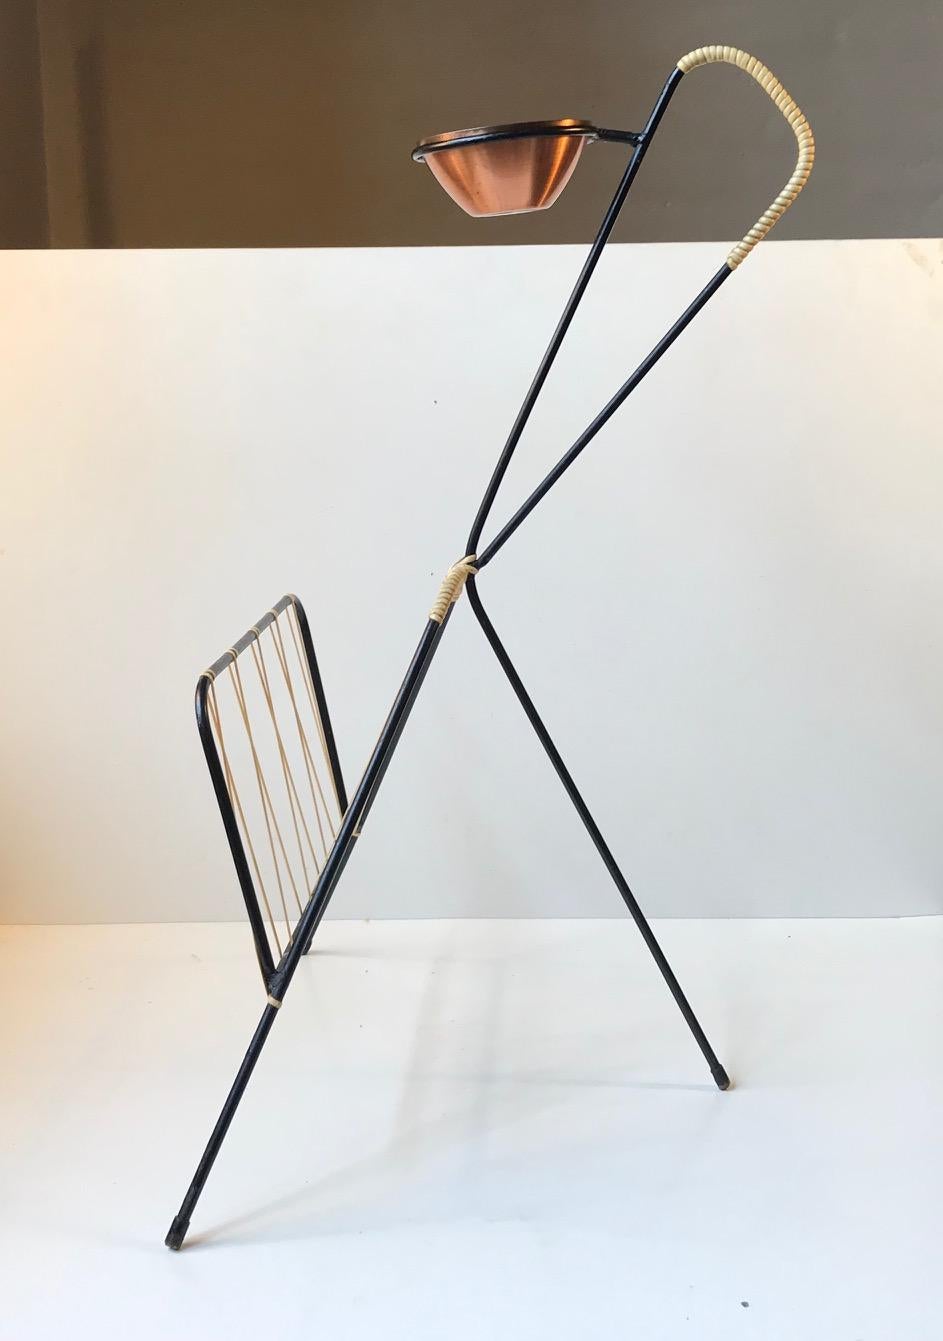 A graphic looking magazine rack with a removable bowl or ashtray in partially anodized copper from Corona, Denmark. Its commonly called the Giraffe due to its shape. The body is constructed from bend wire/string iron painted in black and with